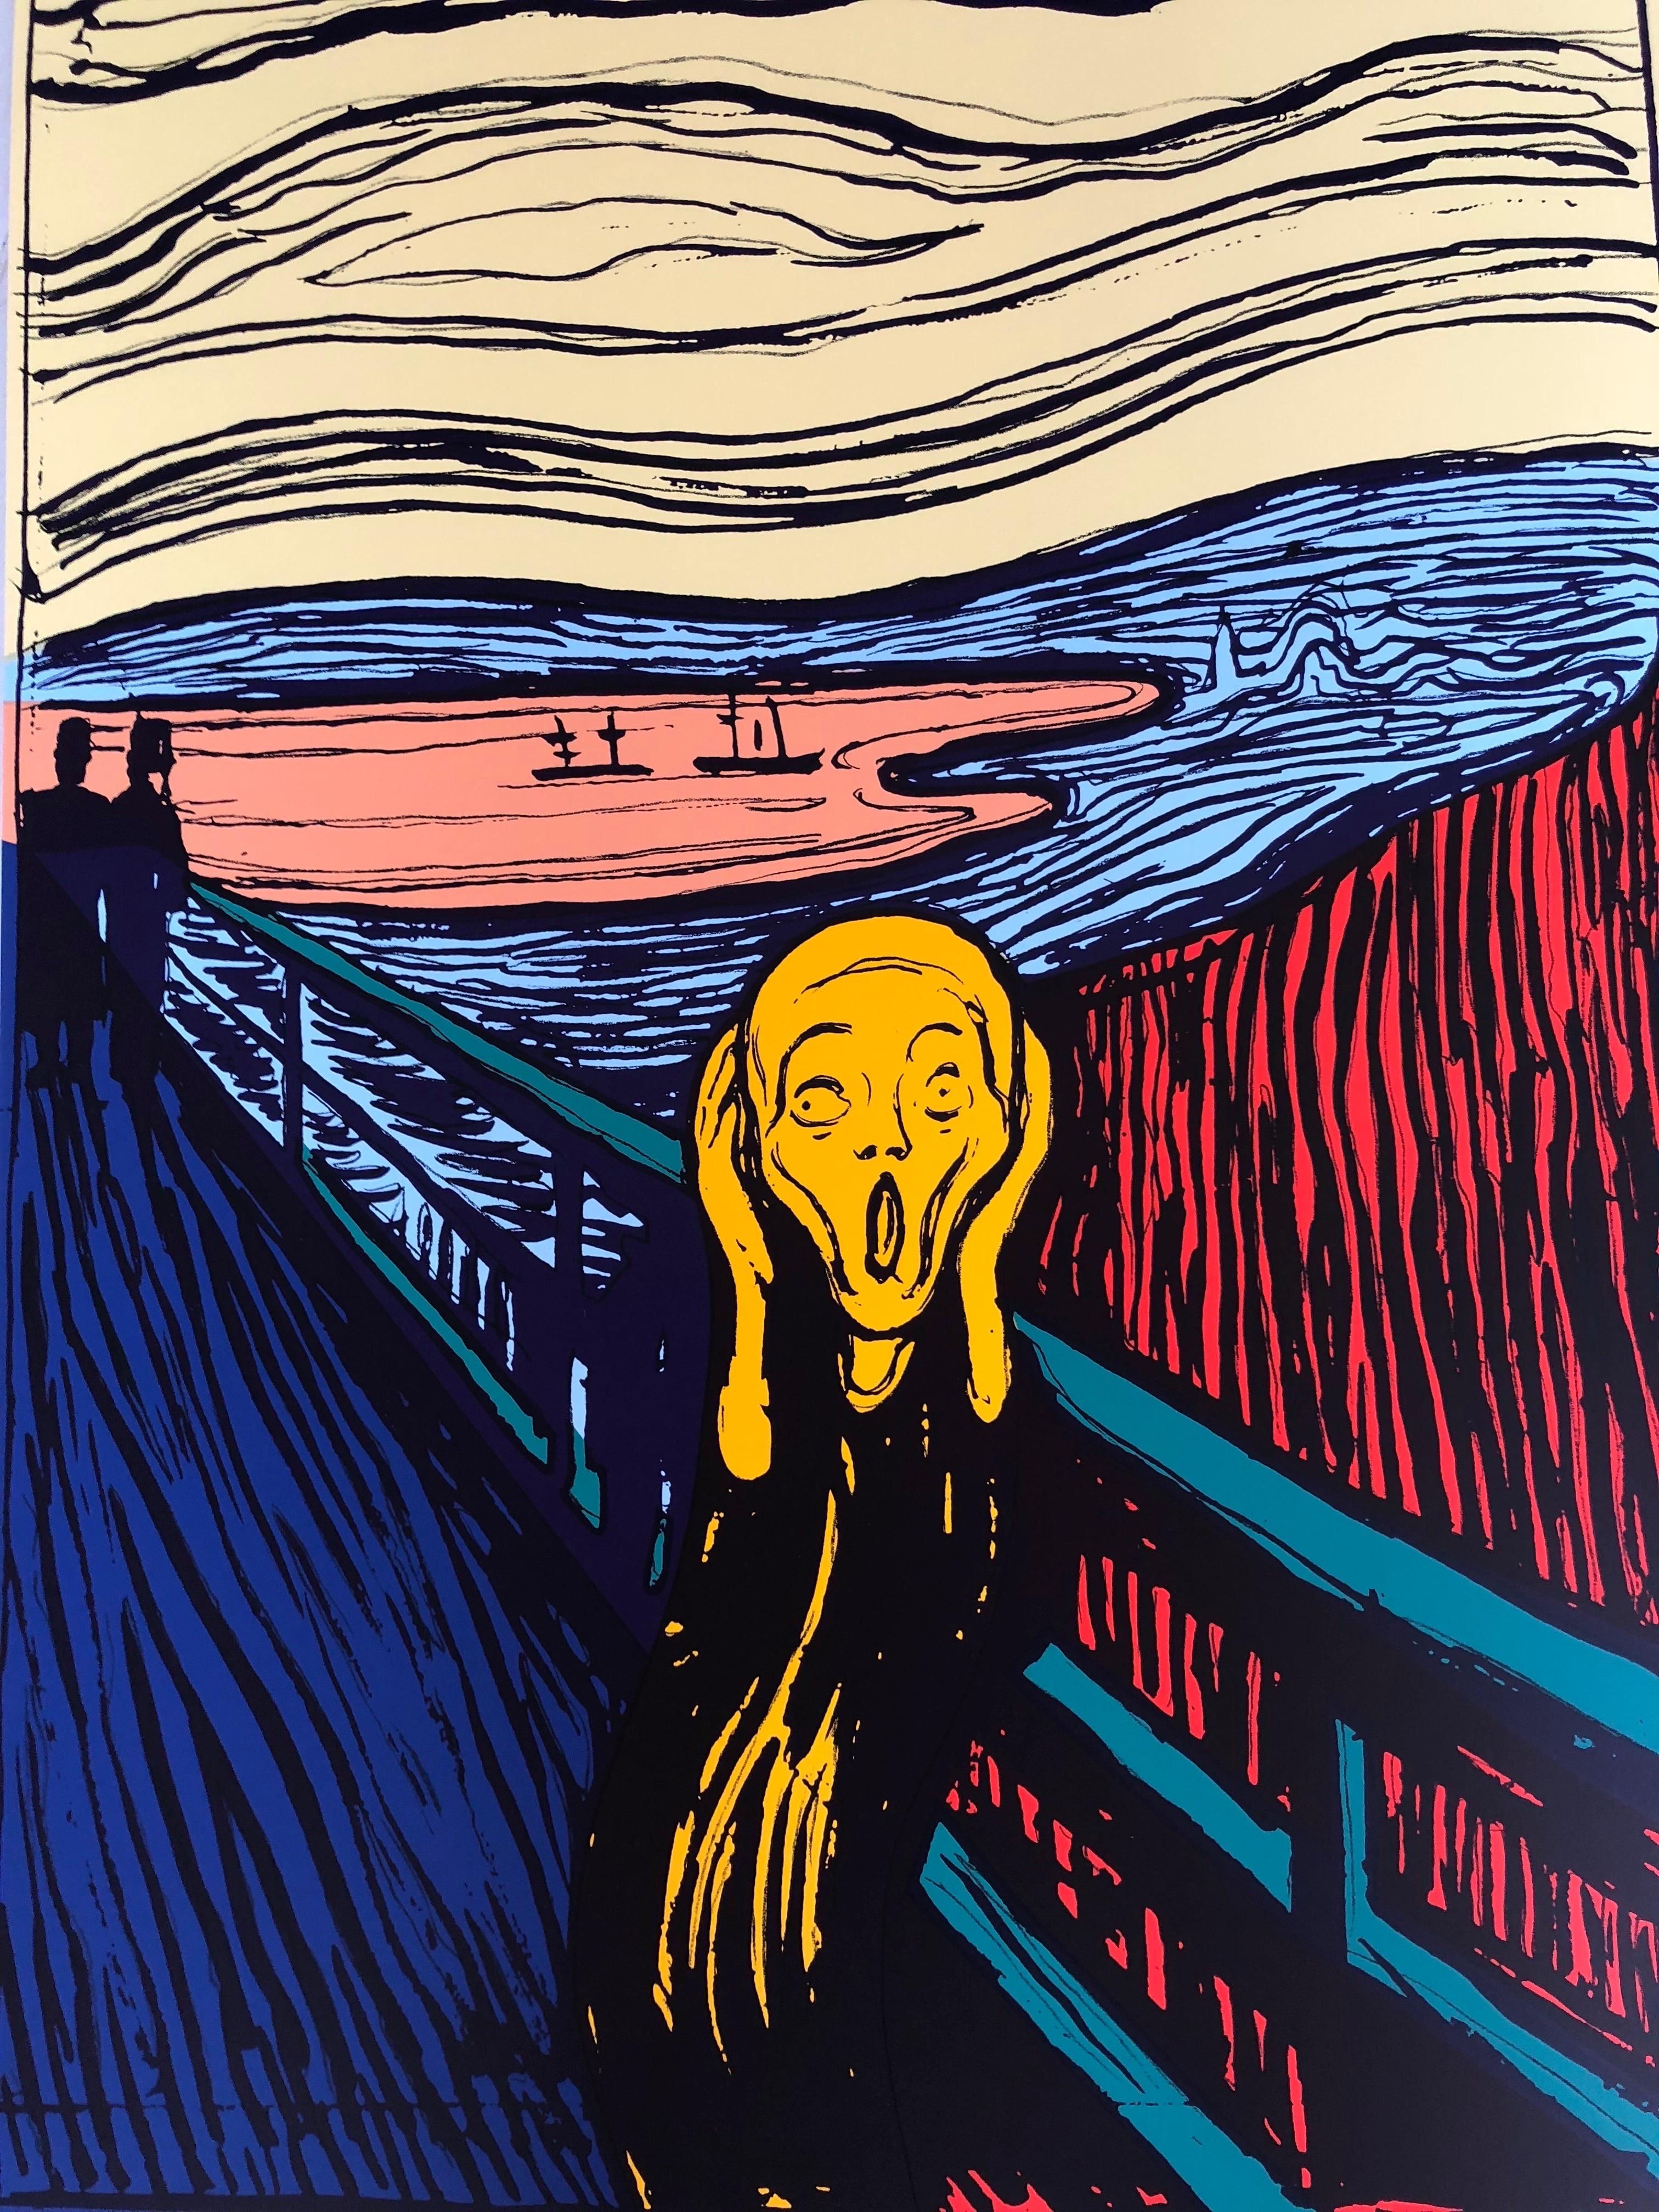 Sunday B. Morning (Andy Warhol), Munch's "The Scream" Orange


Silkscreen print from photo negatives of original Factory Additions stencil on museum quality board. Printed with the highest quality archival inks

Edition of 1000

63.5 × 88.9 cm  25 x